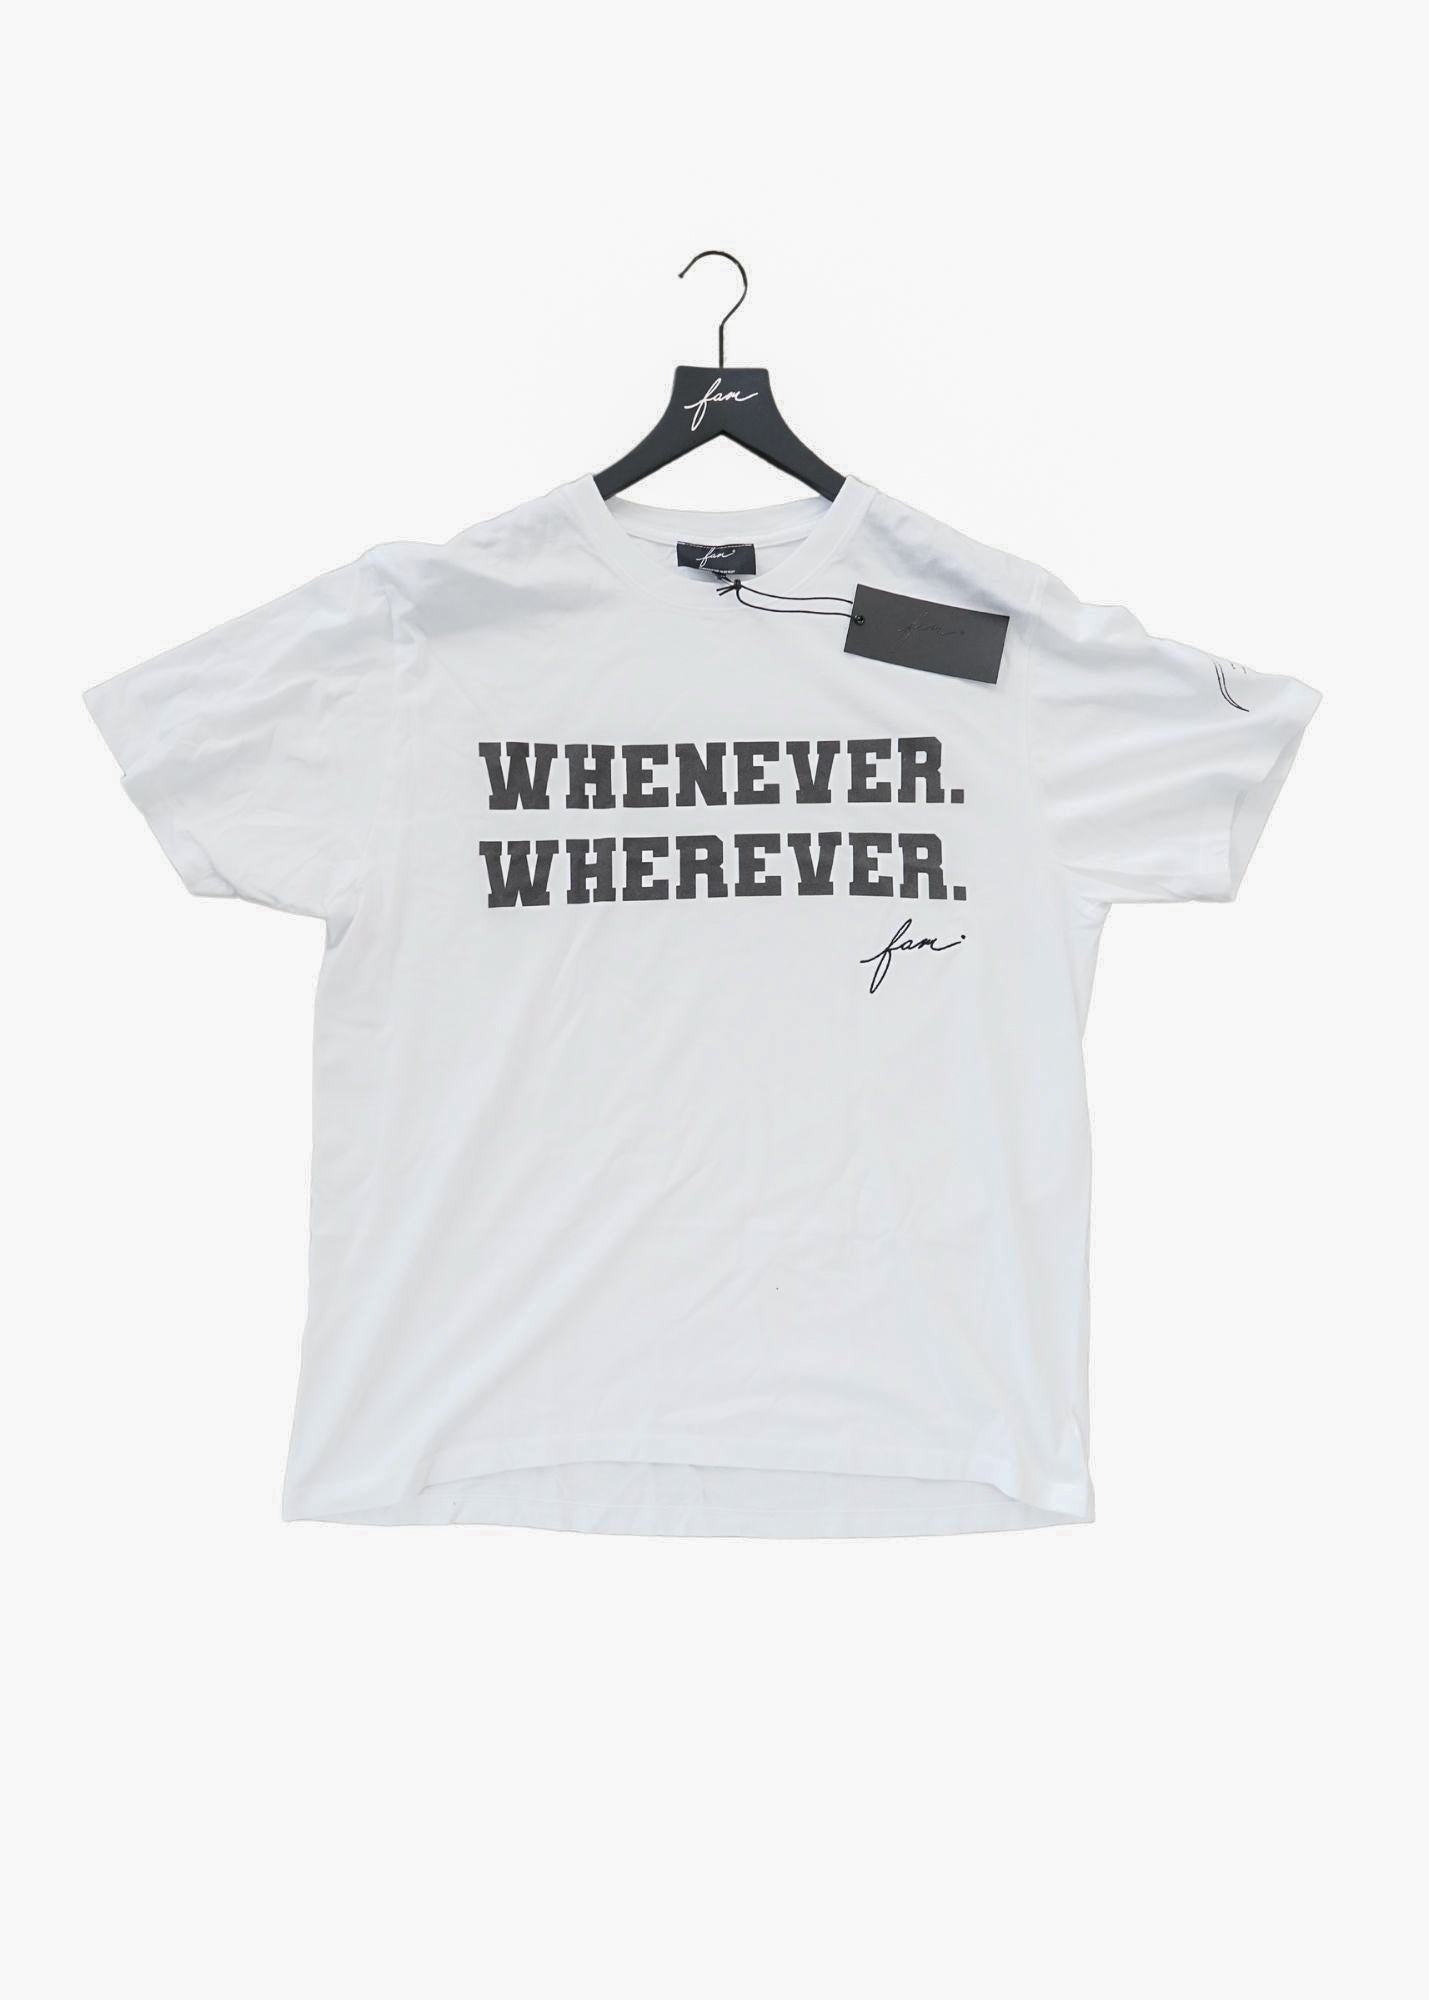 Fam - Whenever. Wherever. - Embroidered Graphic Tee